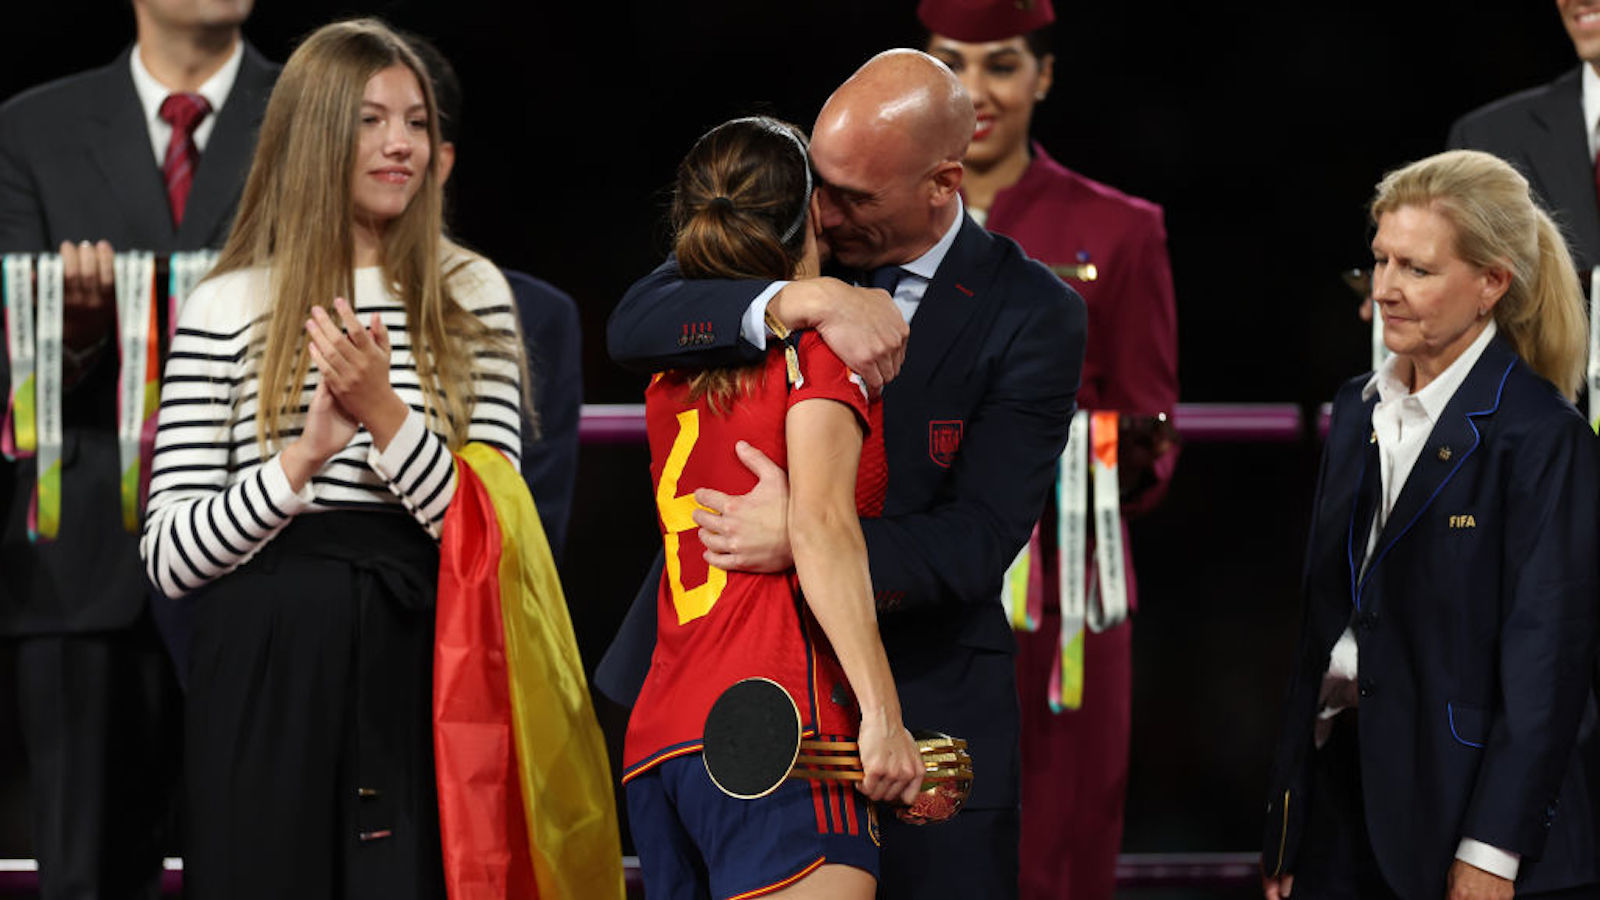 Luis Rubiales, President of the Royal Spanish Federation greets Aitana Bonmati of Spain after the FIFA Women's World Cup Australia &amp; New Zealand 2023 Final match between Spain and England at Stadium Australia on August 20, 2023 in Sydney, Australia.